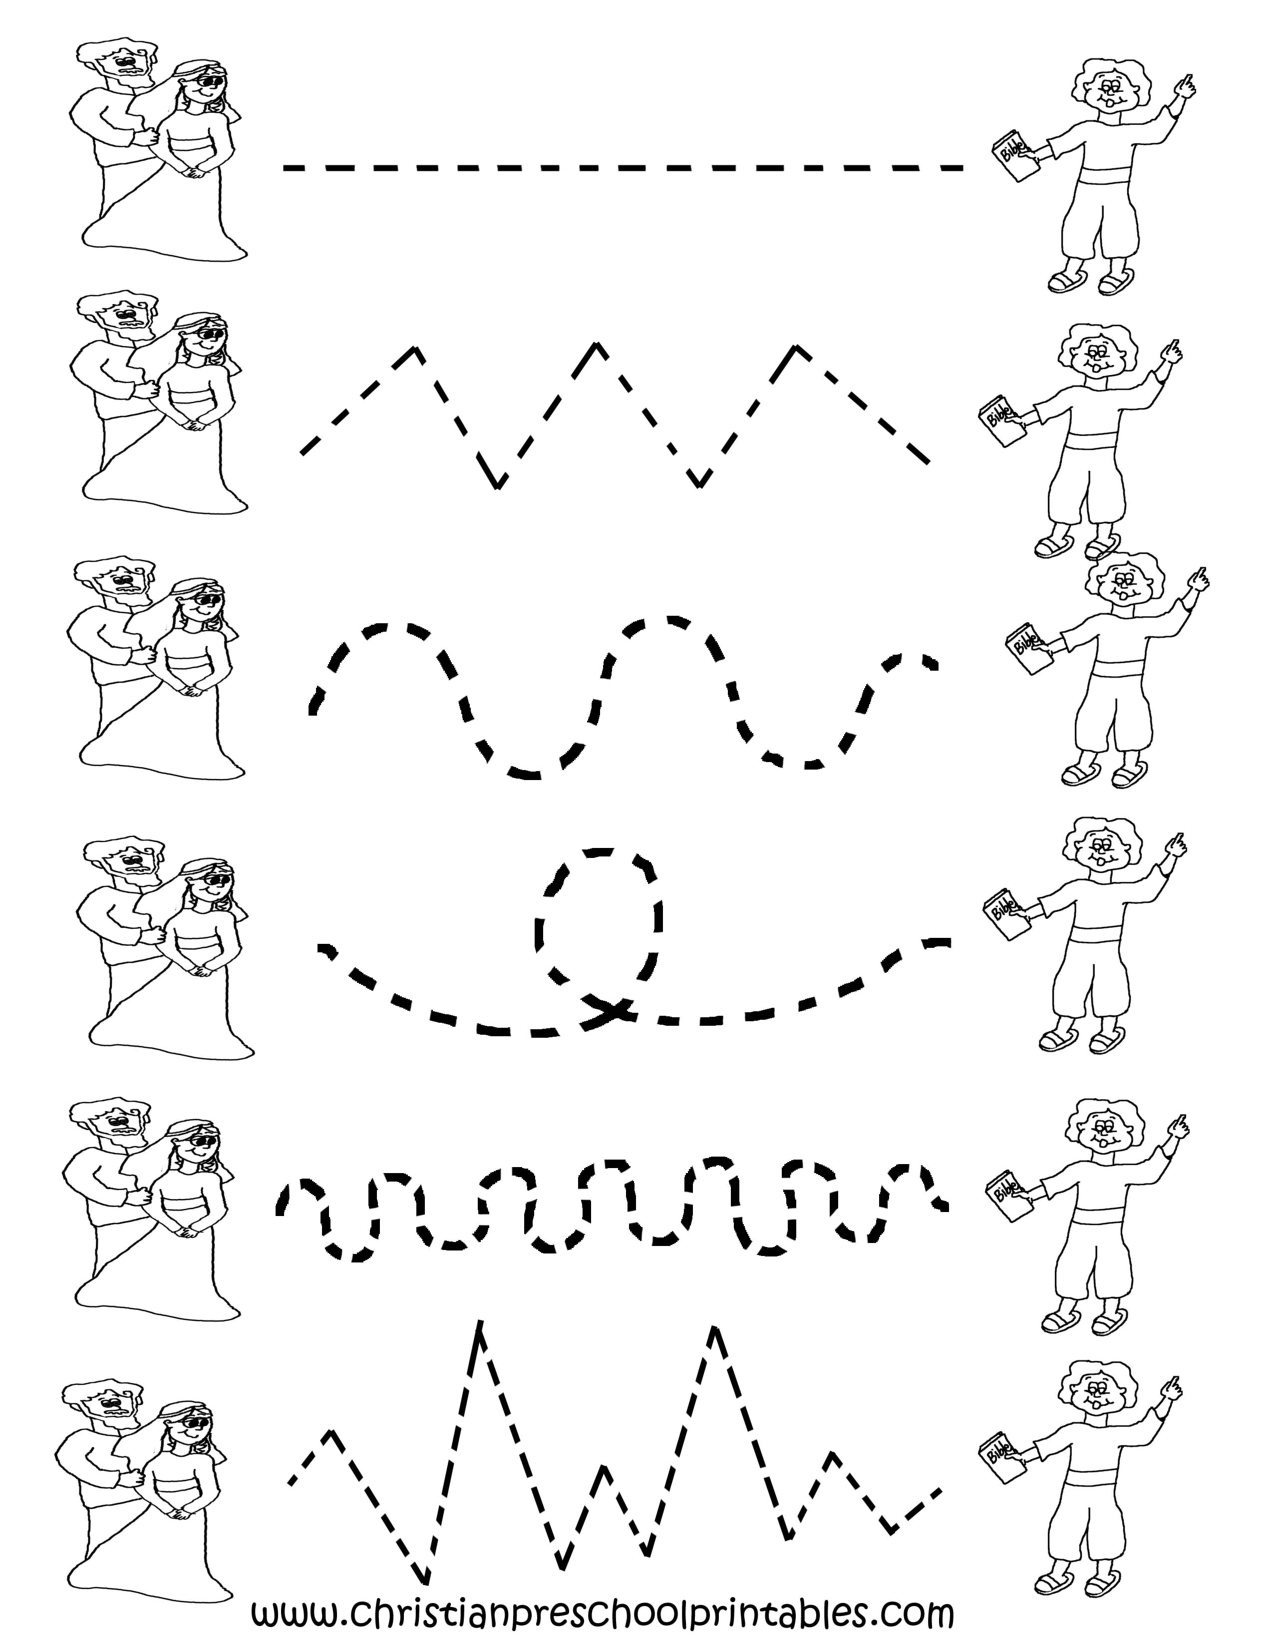 Image Detail For -Preschool Tracing Worksheets | Preschool Ideas | Free Printable Preschool Worksheets Tracing Lines